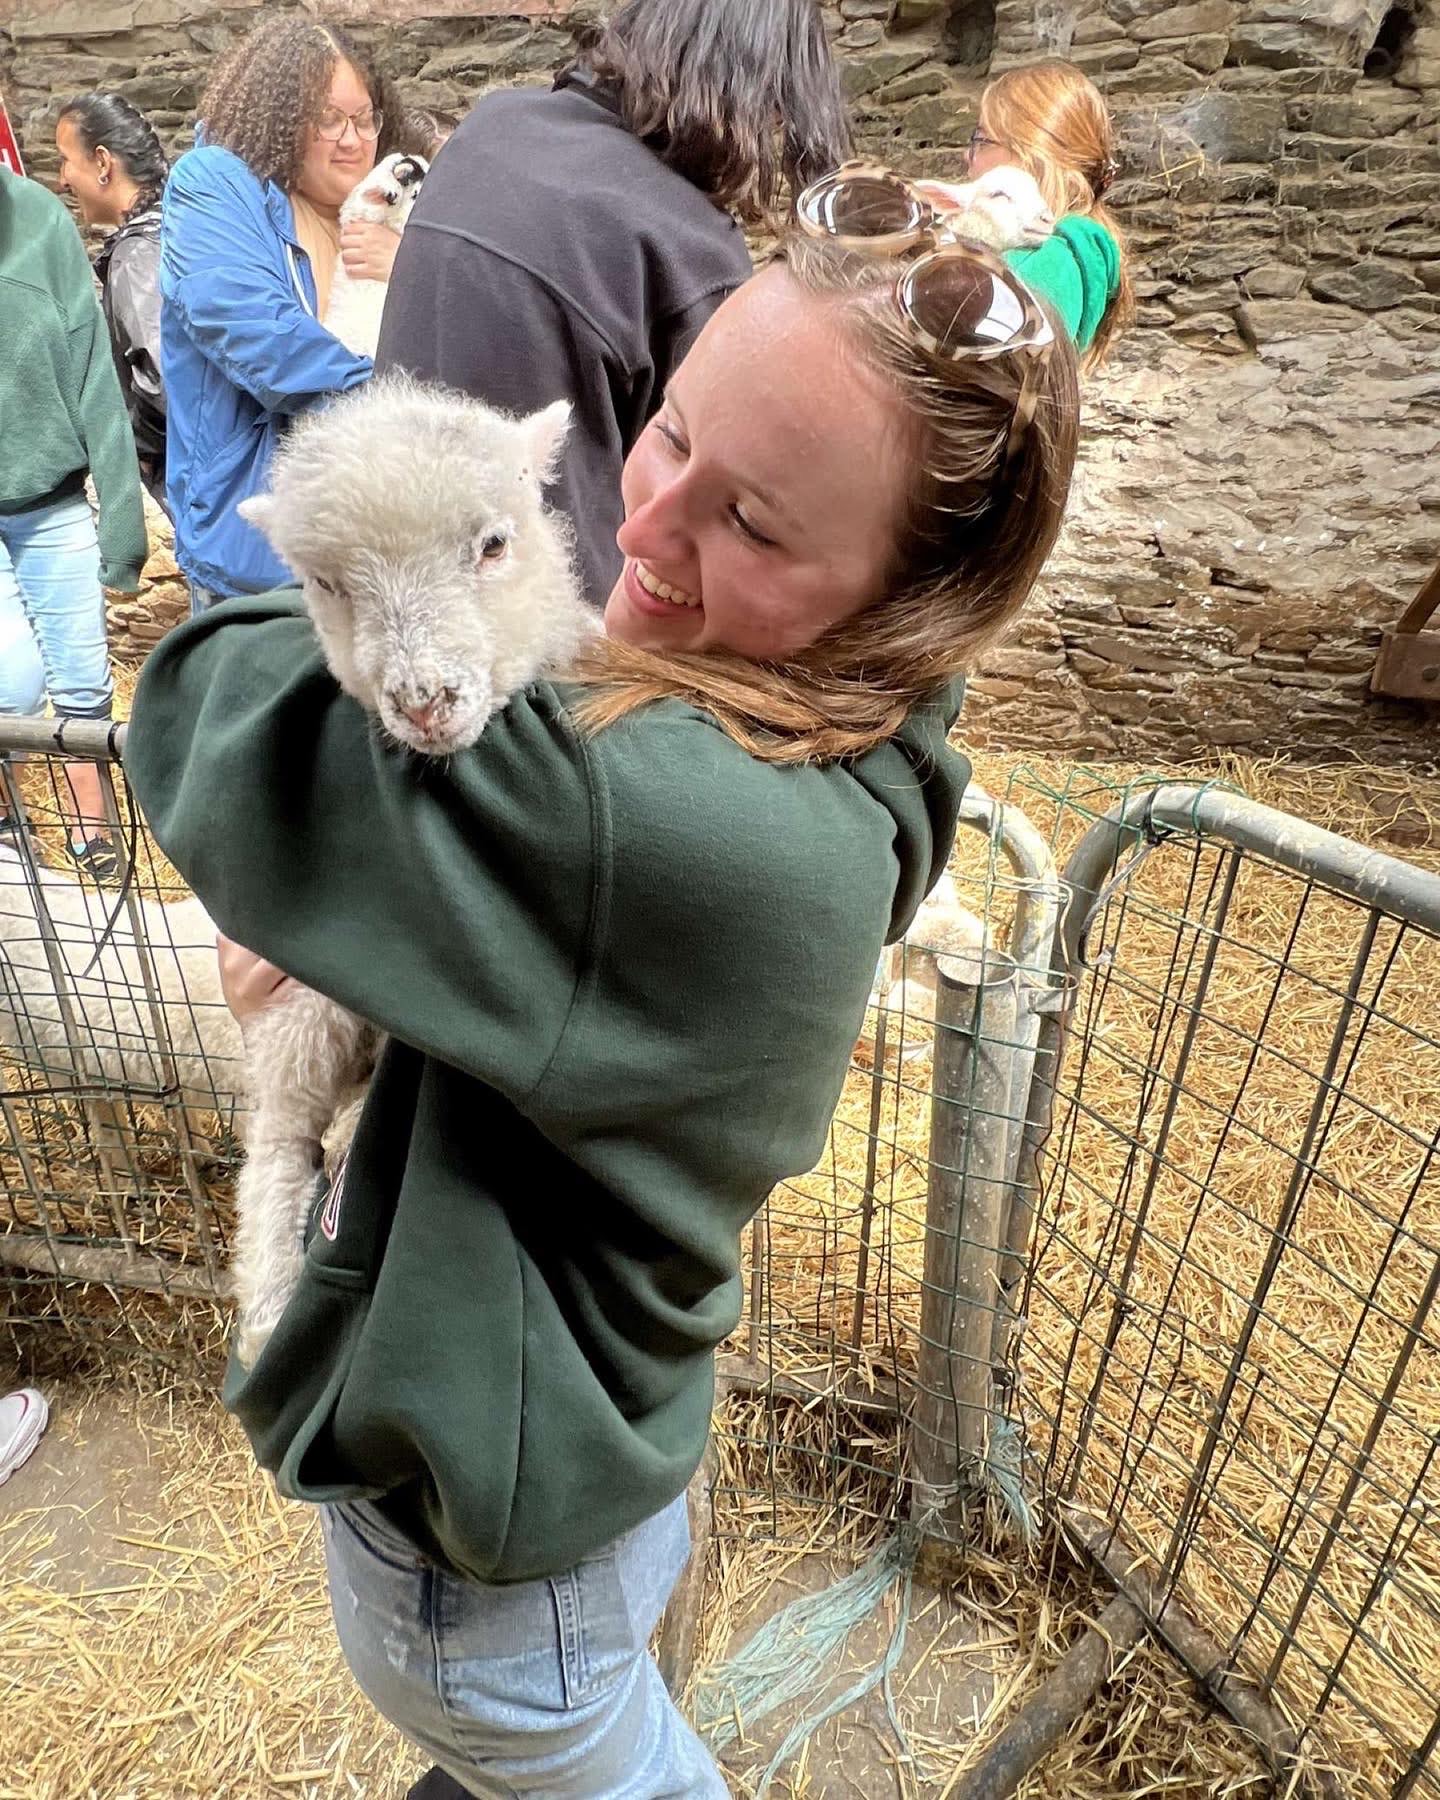 KU honors student in Ireland holding a goat.